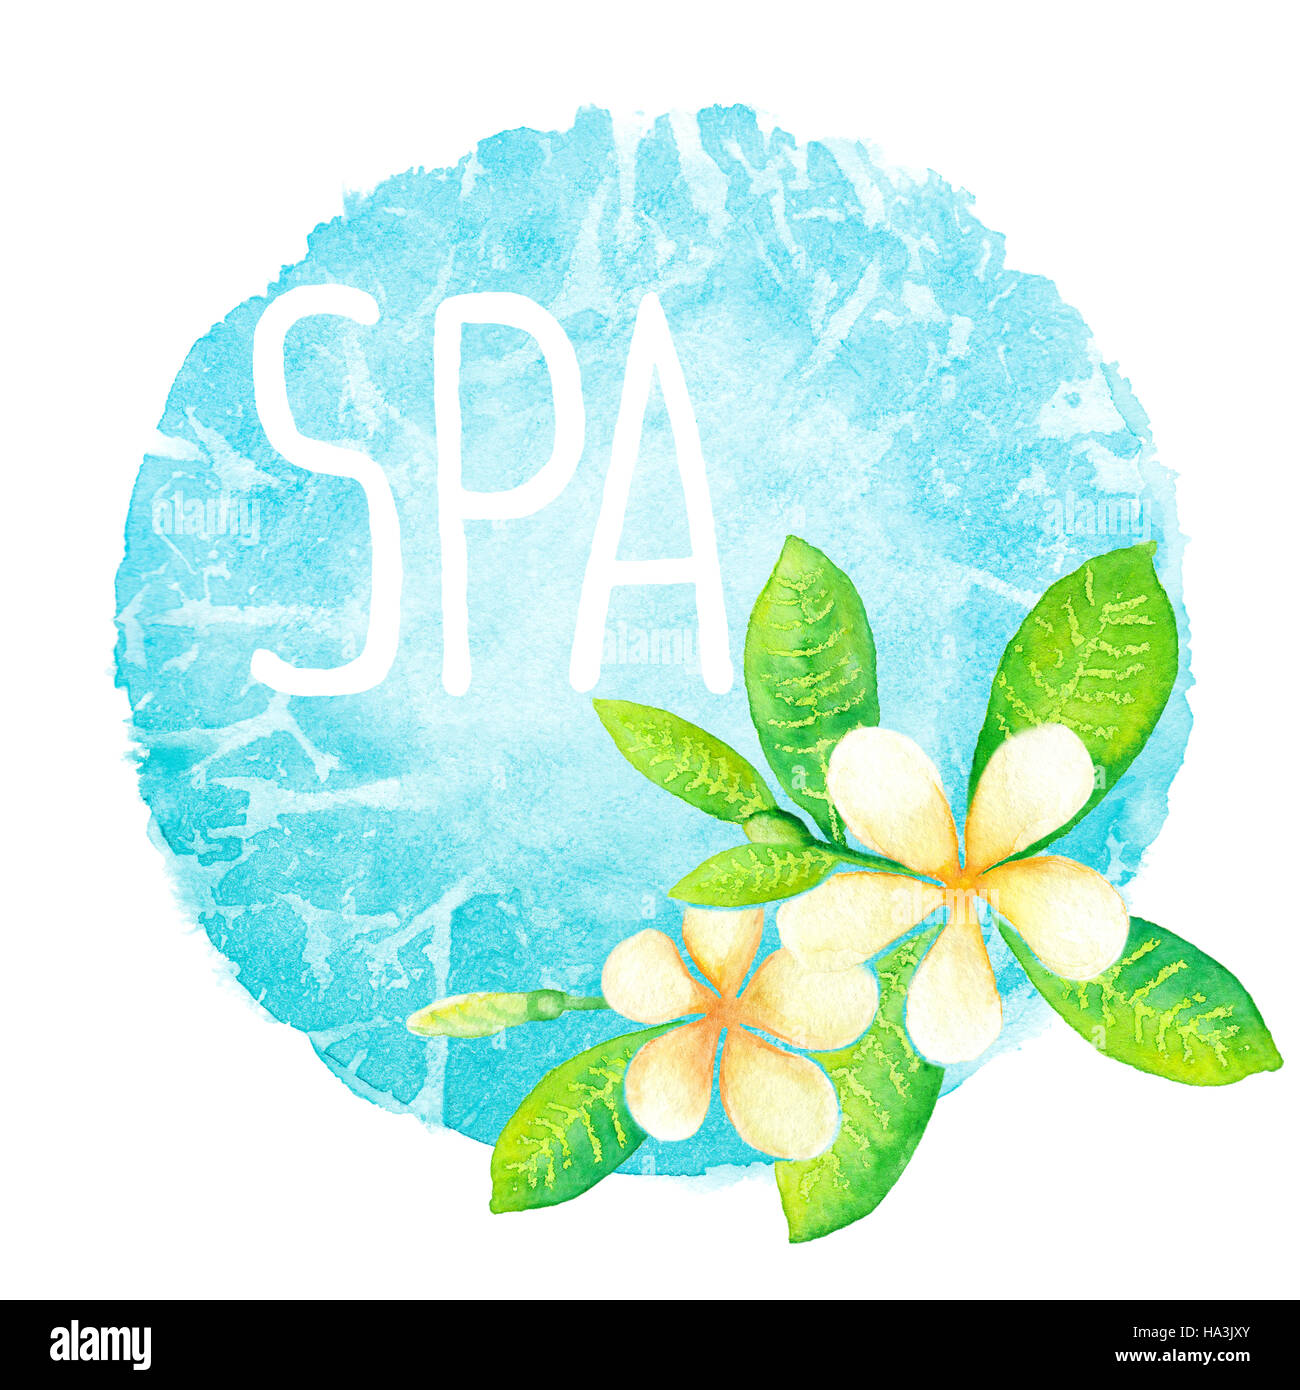 Frangipani flowers and spa lettering on the blue spot background watercolor painting Stock Photo